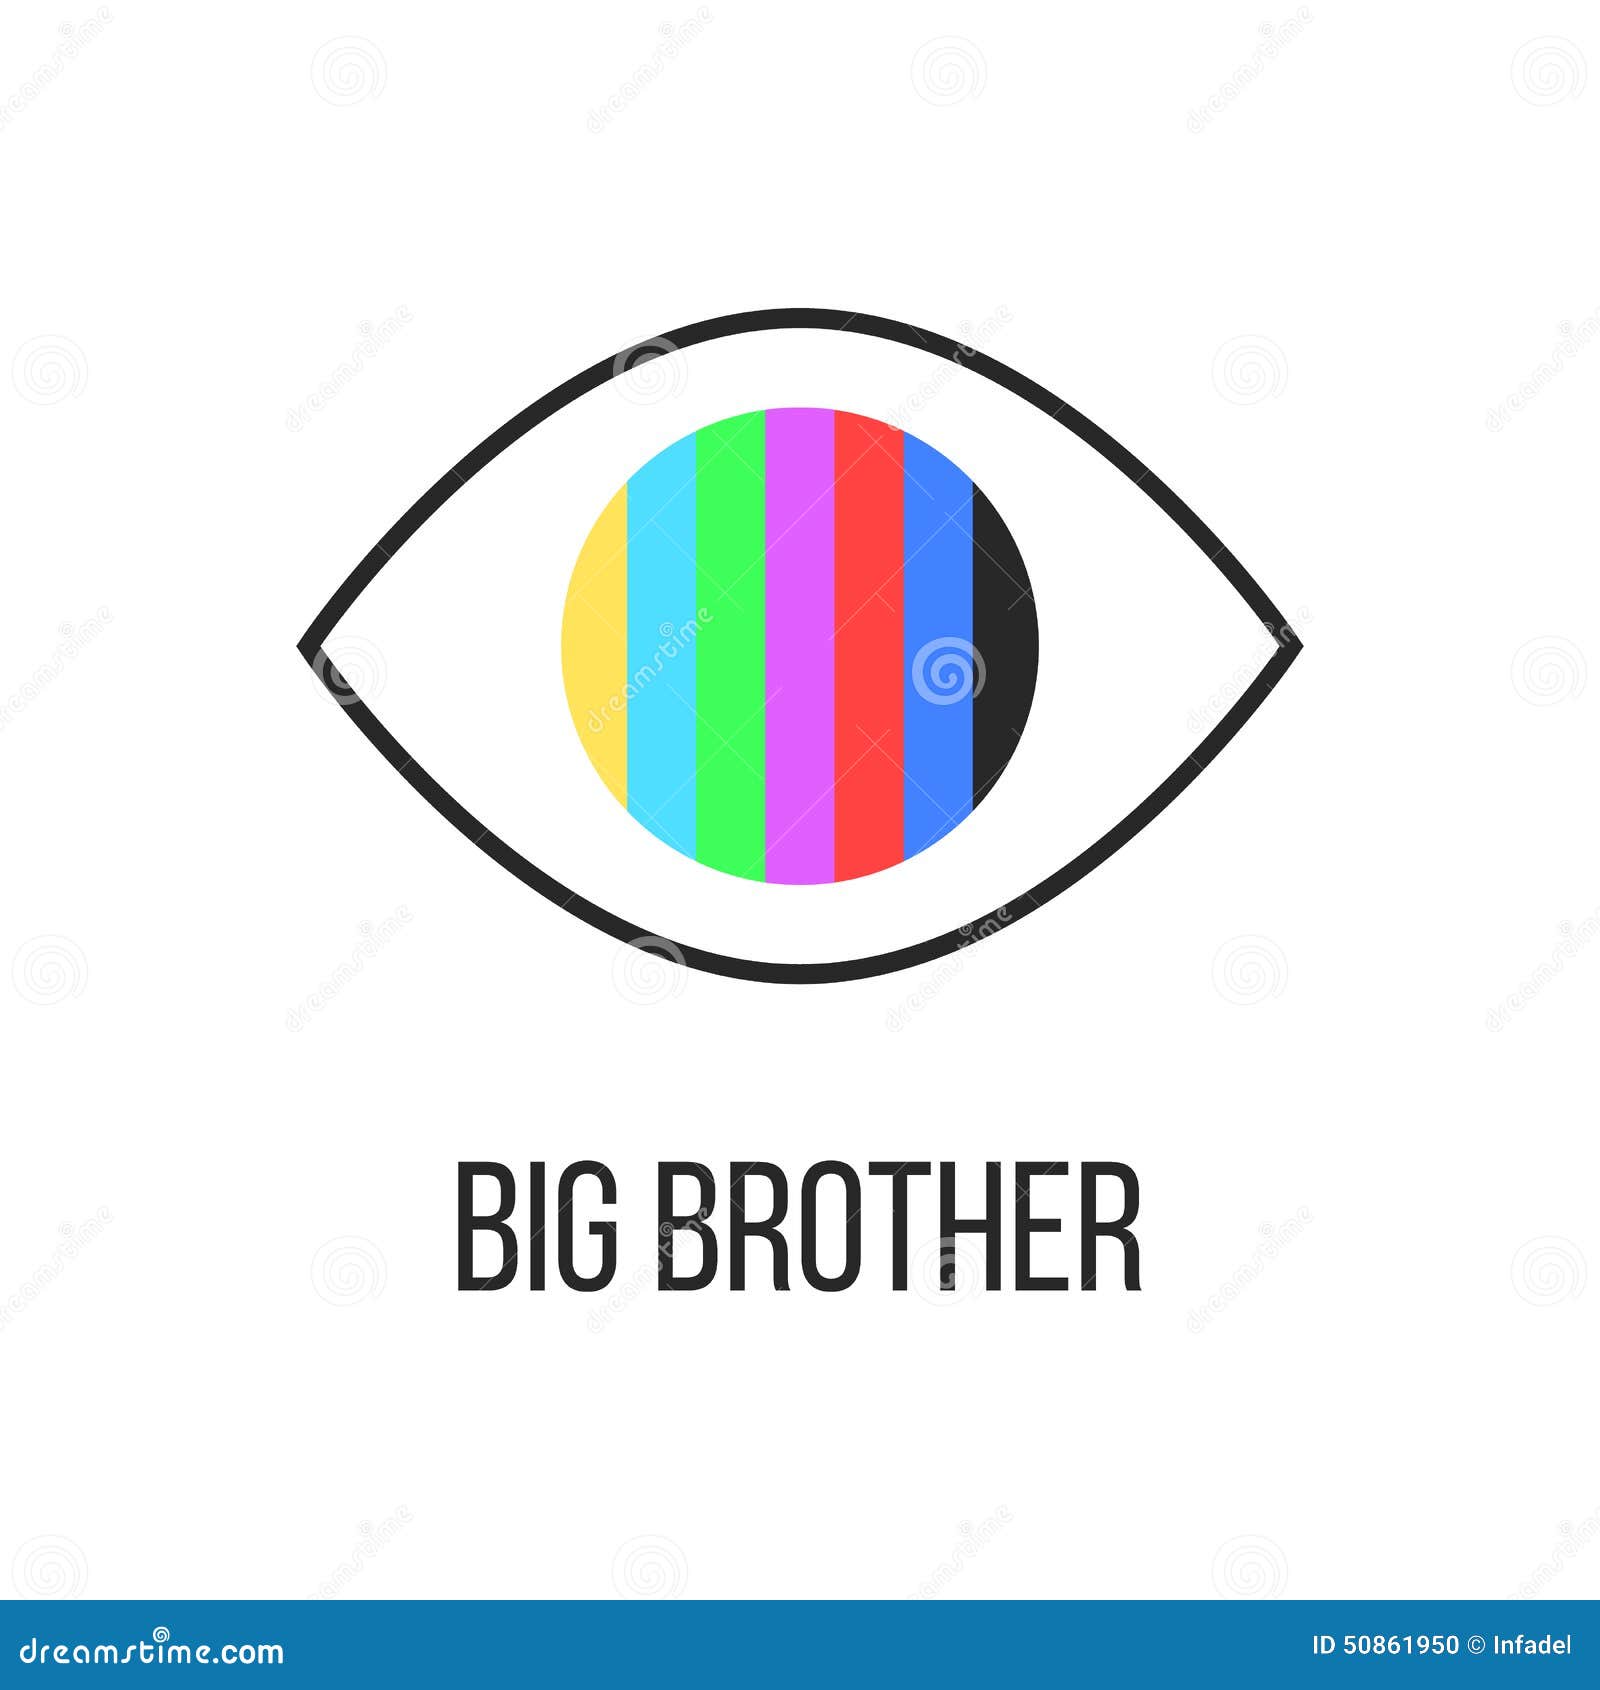 clipart big brother watching you - photo #5